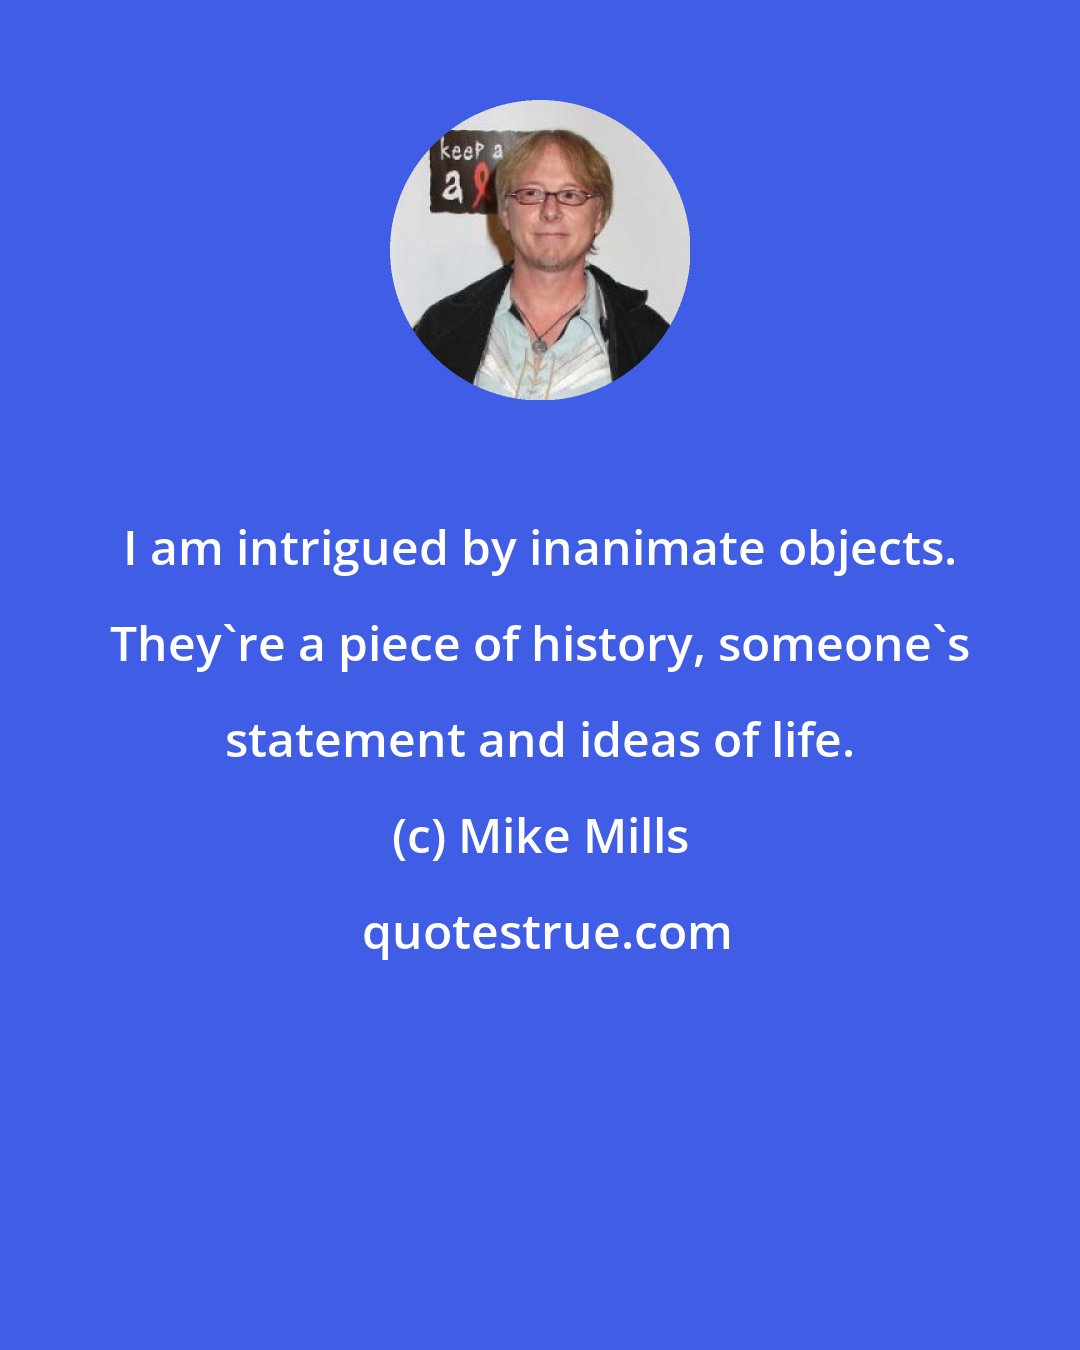 Mike Mills: I am intrigued by inanimate objects. They're a piece of history, someone's statement and ideas of life.